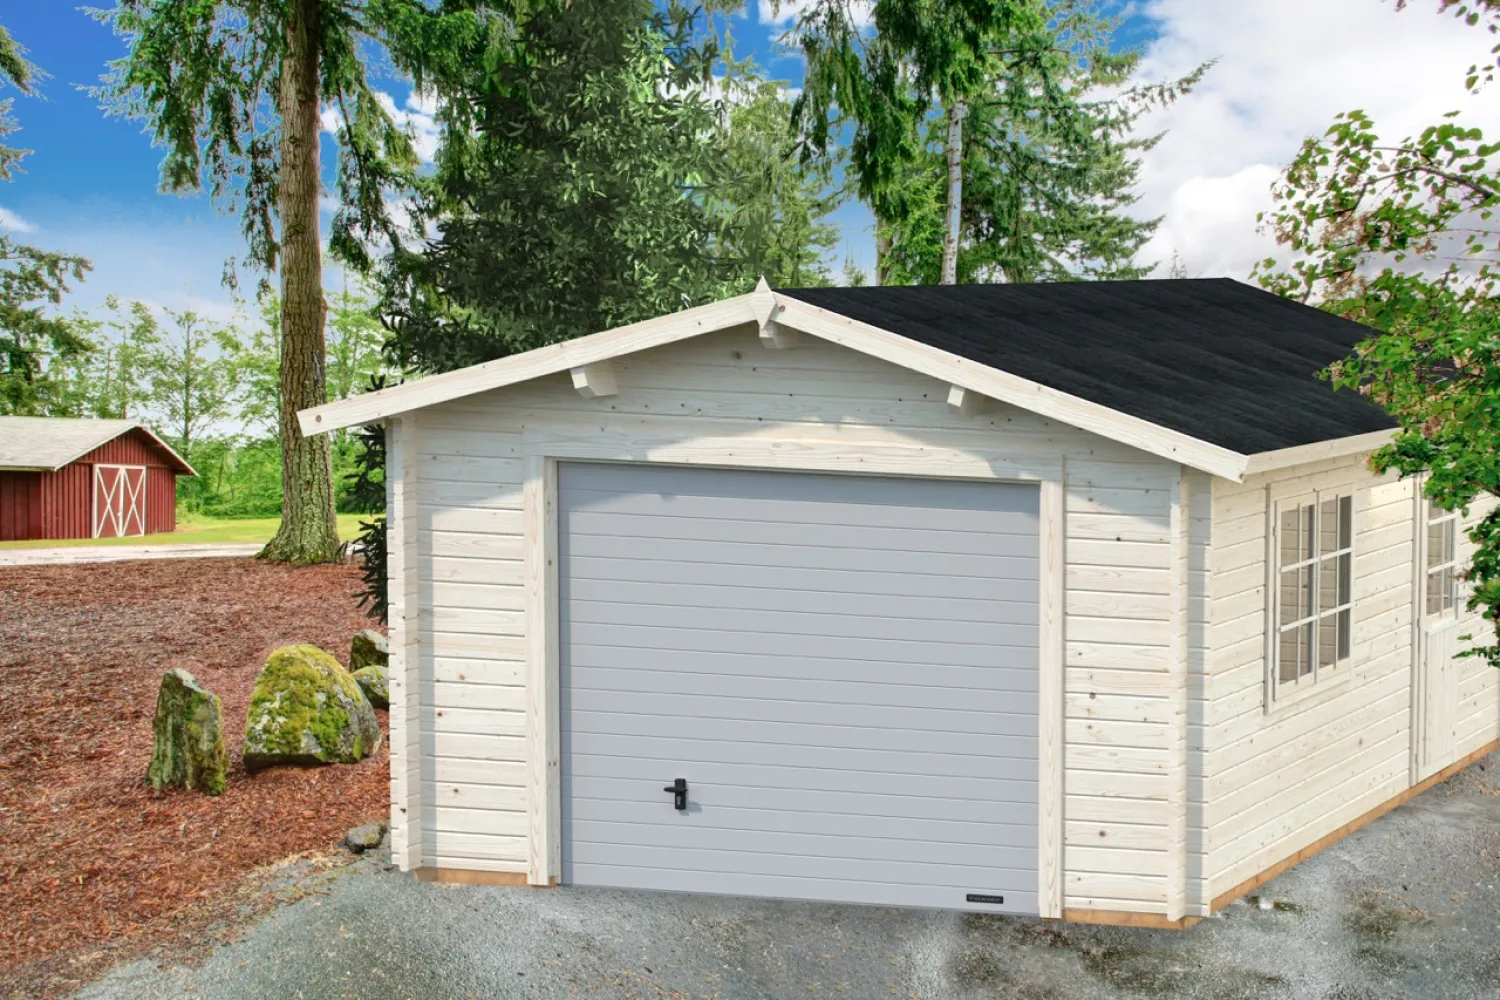 WDPX|gro-1_palmako_garage_roger_190_m2_with_sectional_door_natural_wb.jpg